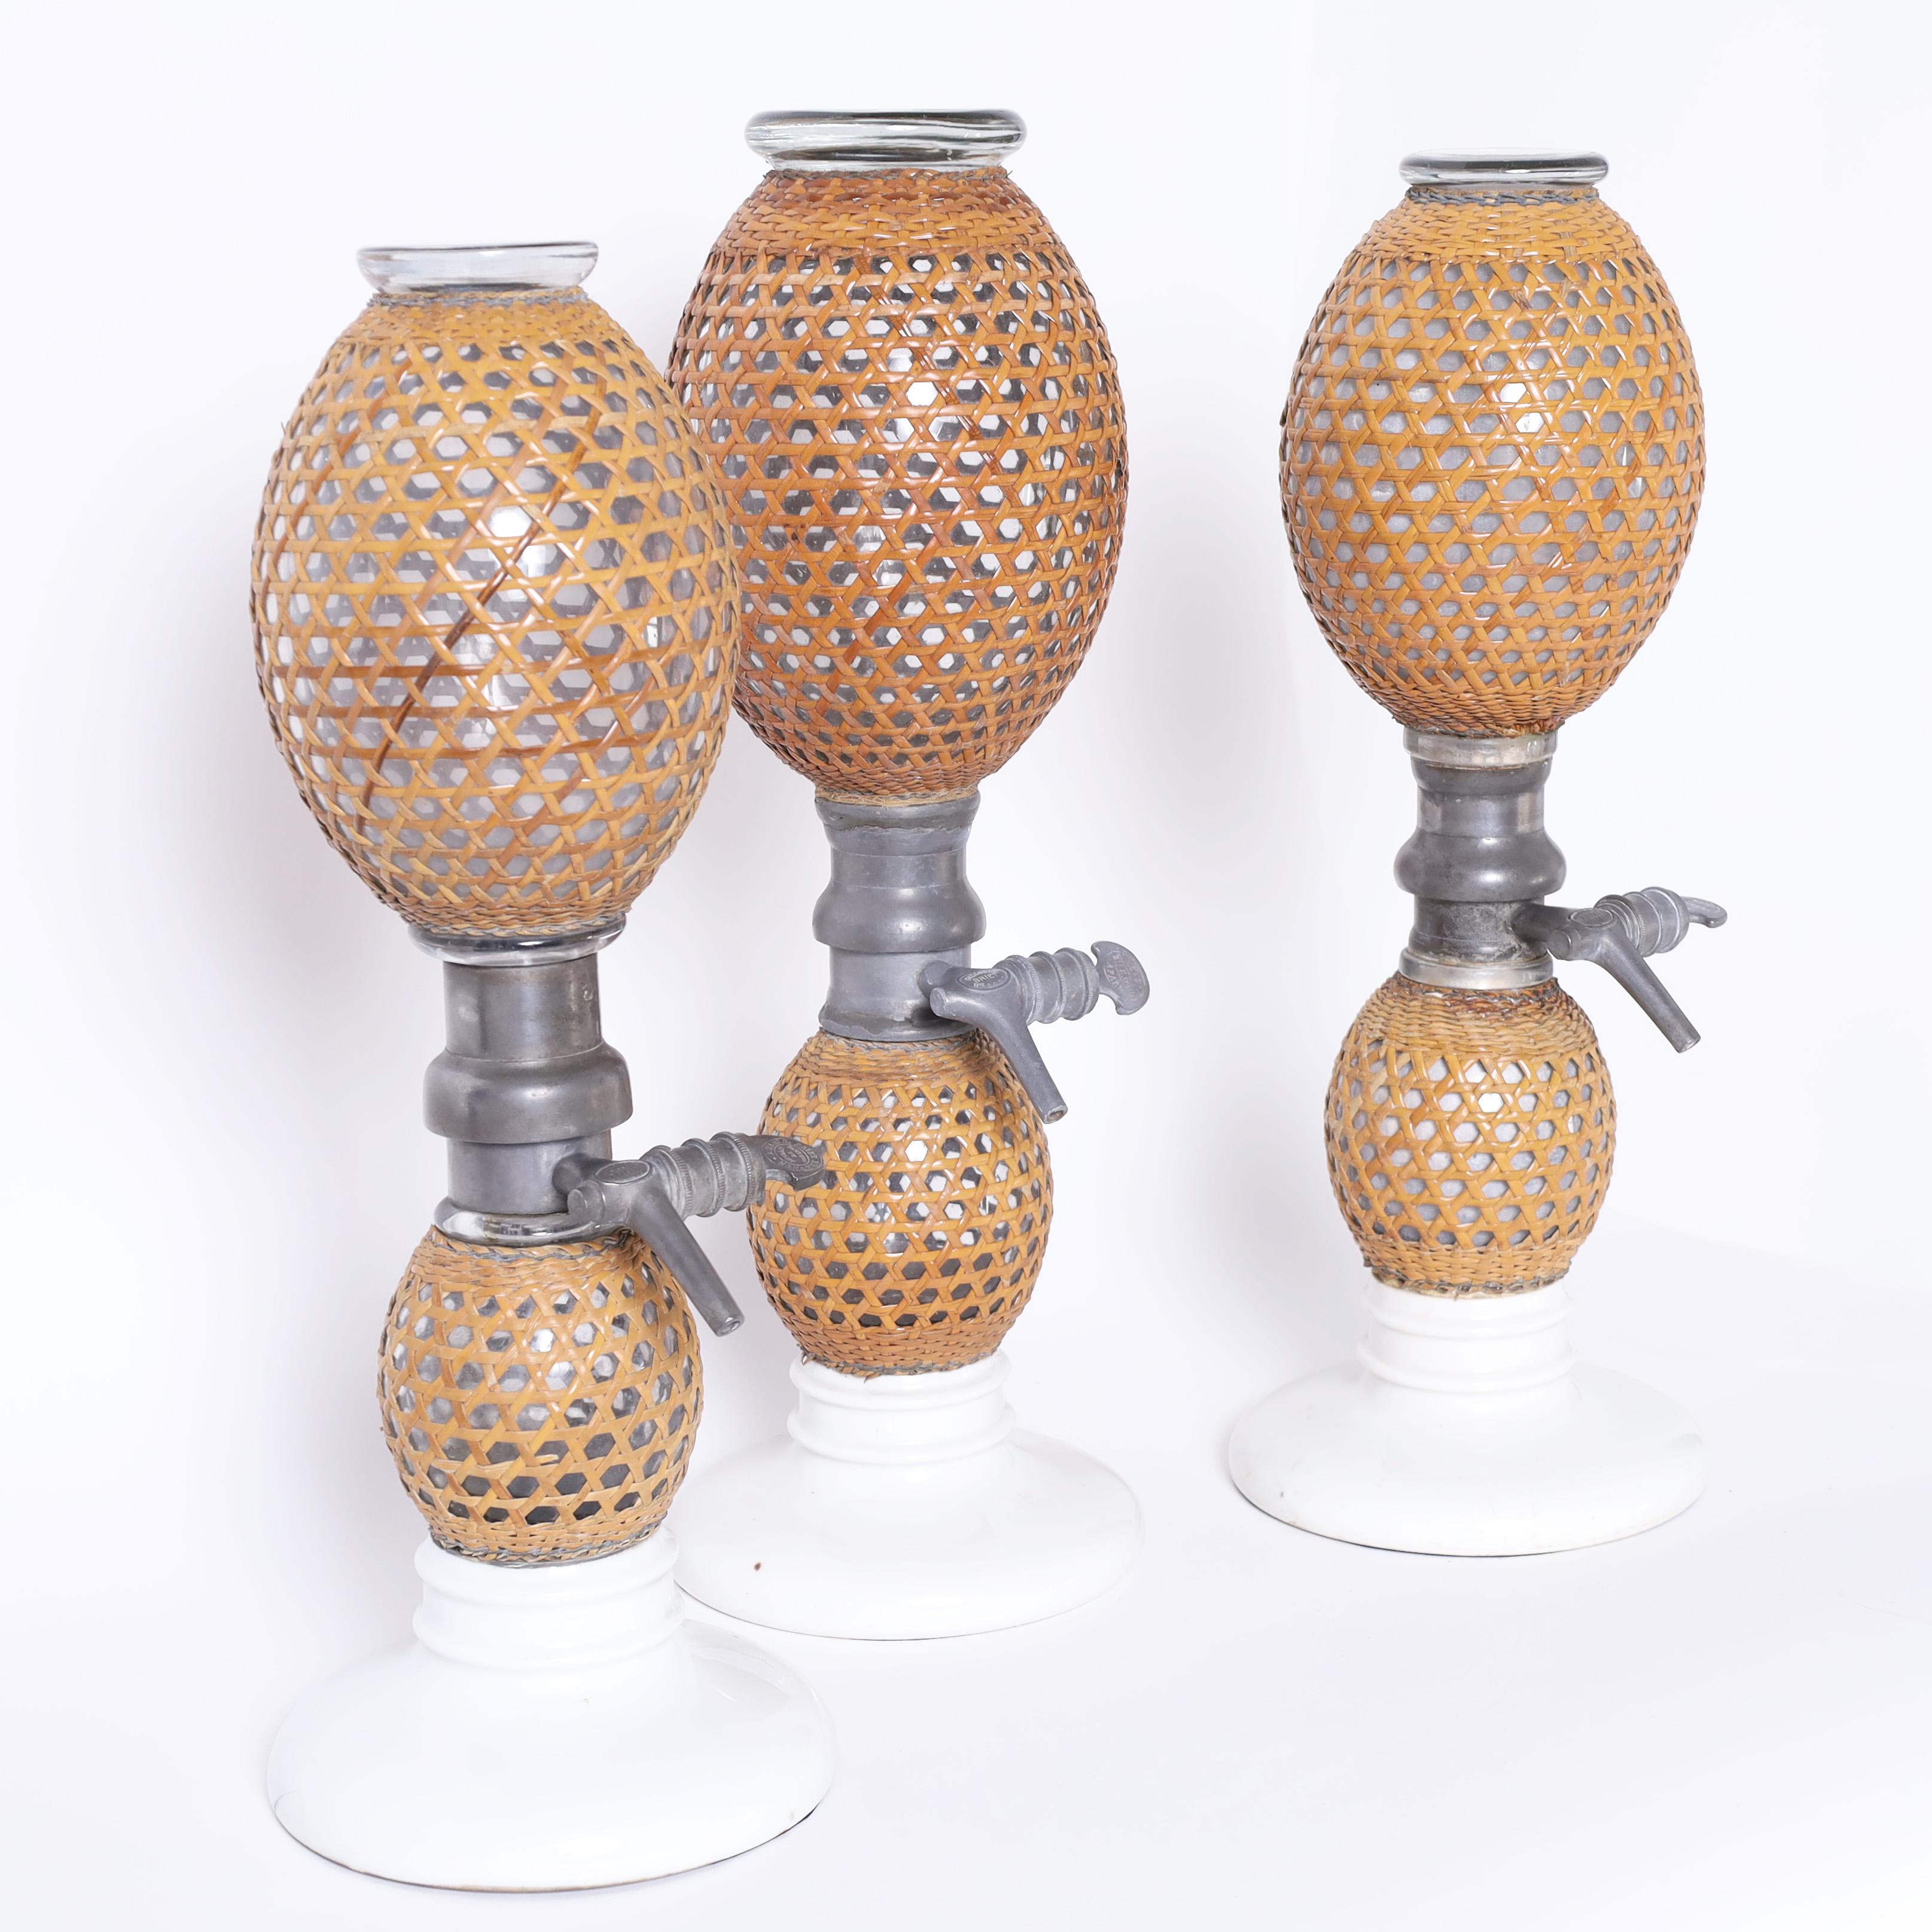 Transporting set of three French seltzer bottles with iconic form crafted with hand blown glass bulbs wrapped in reed having pewter hardware and porcelain bases. 

From left to right:

H: 17.5 DM: 6.5
H: 18.5 DM: 6.5
H: 18 DM: 6.5
